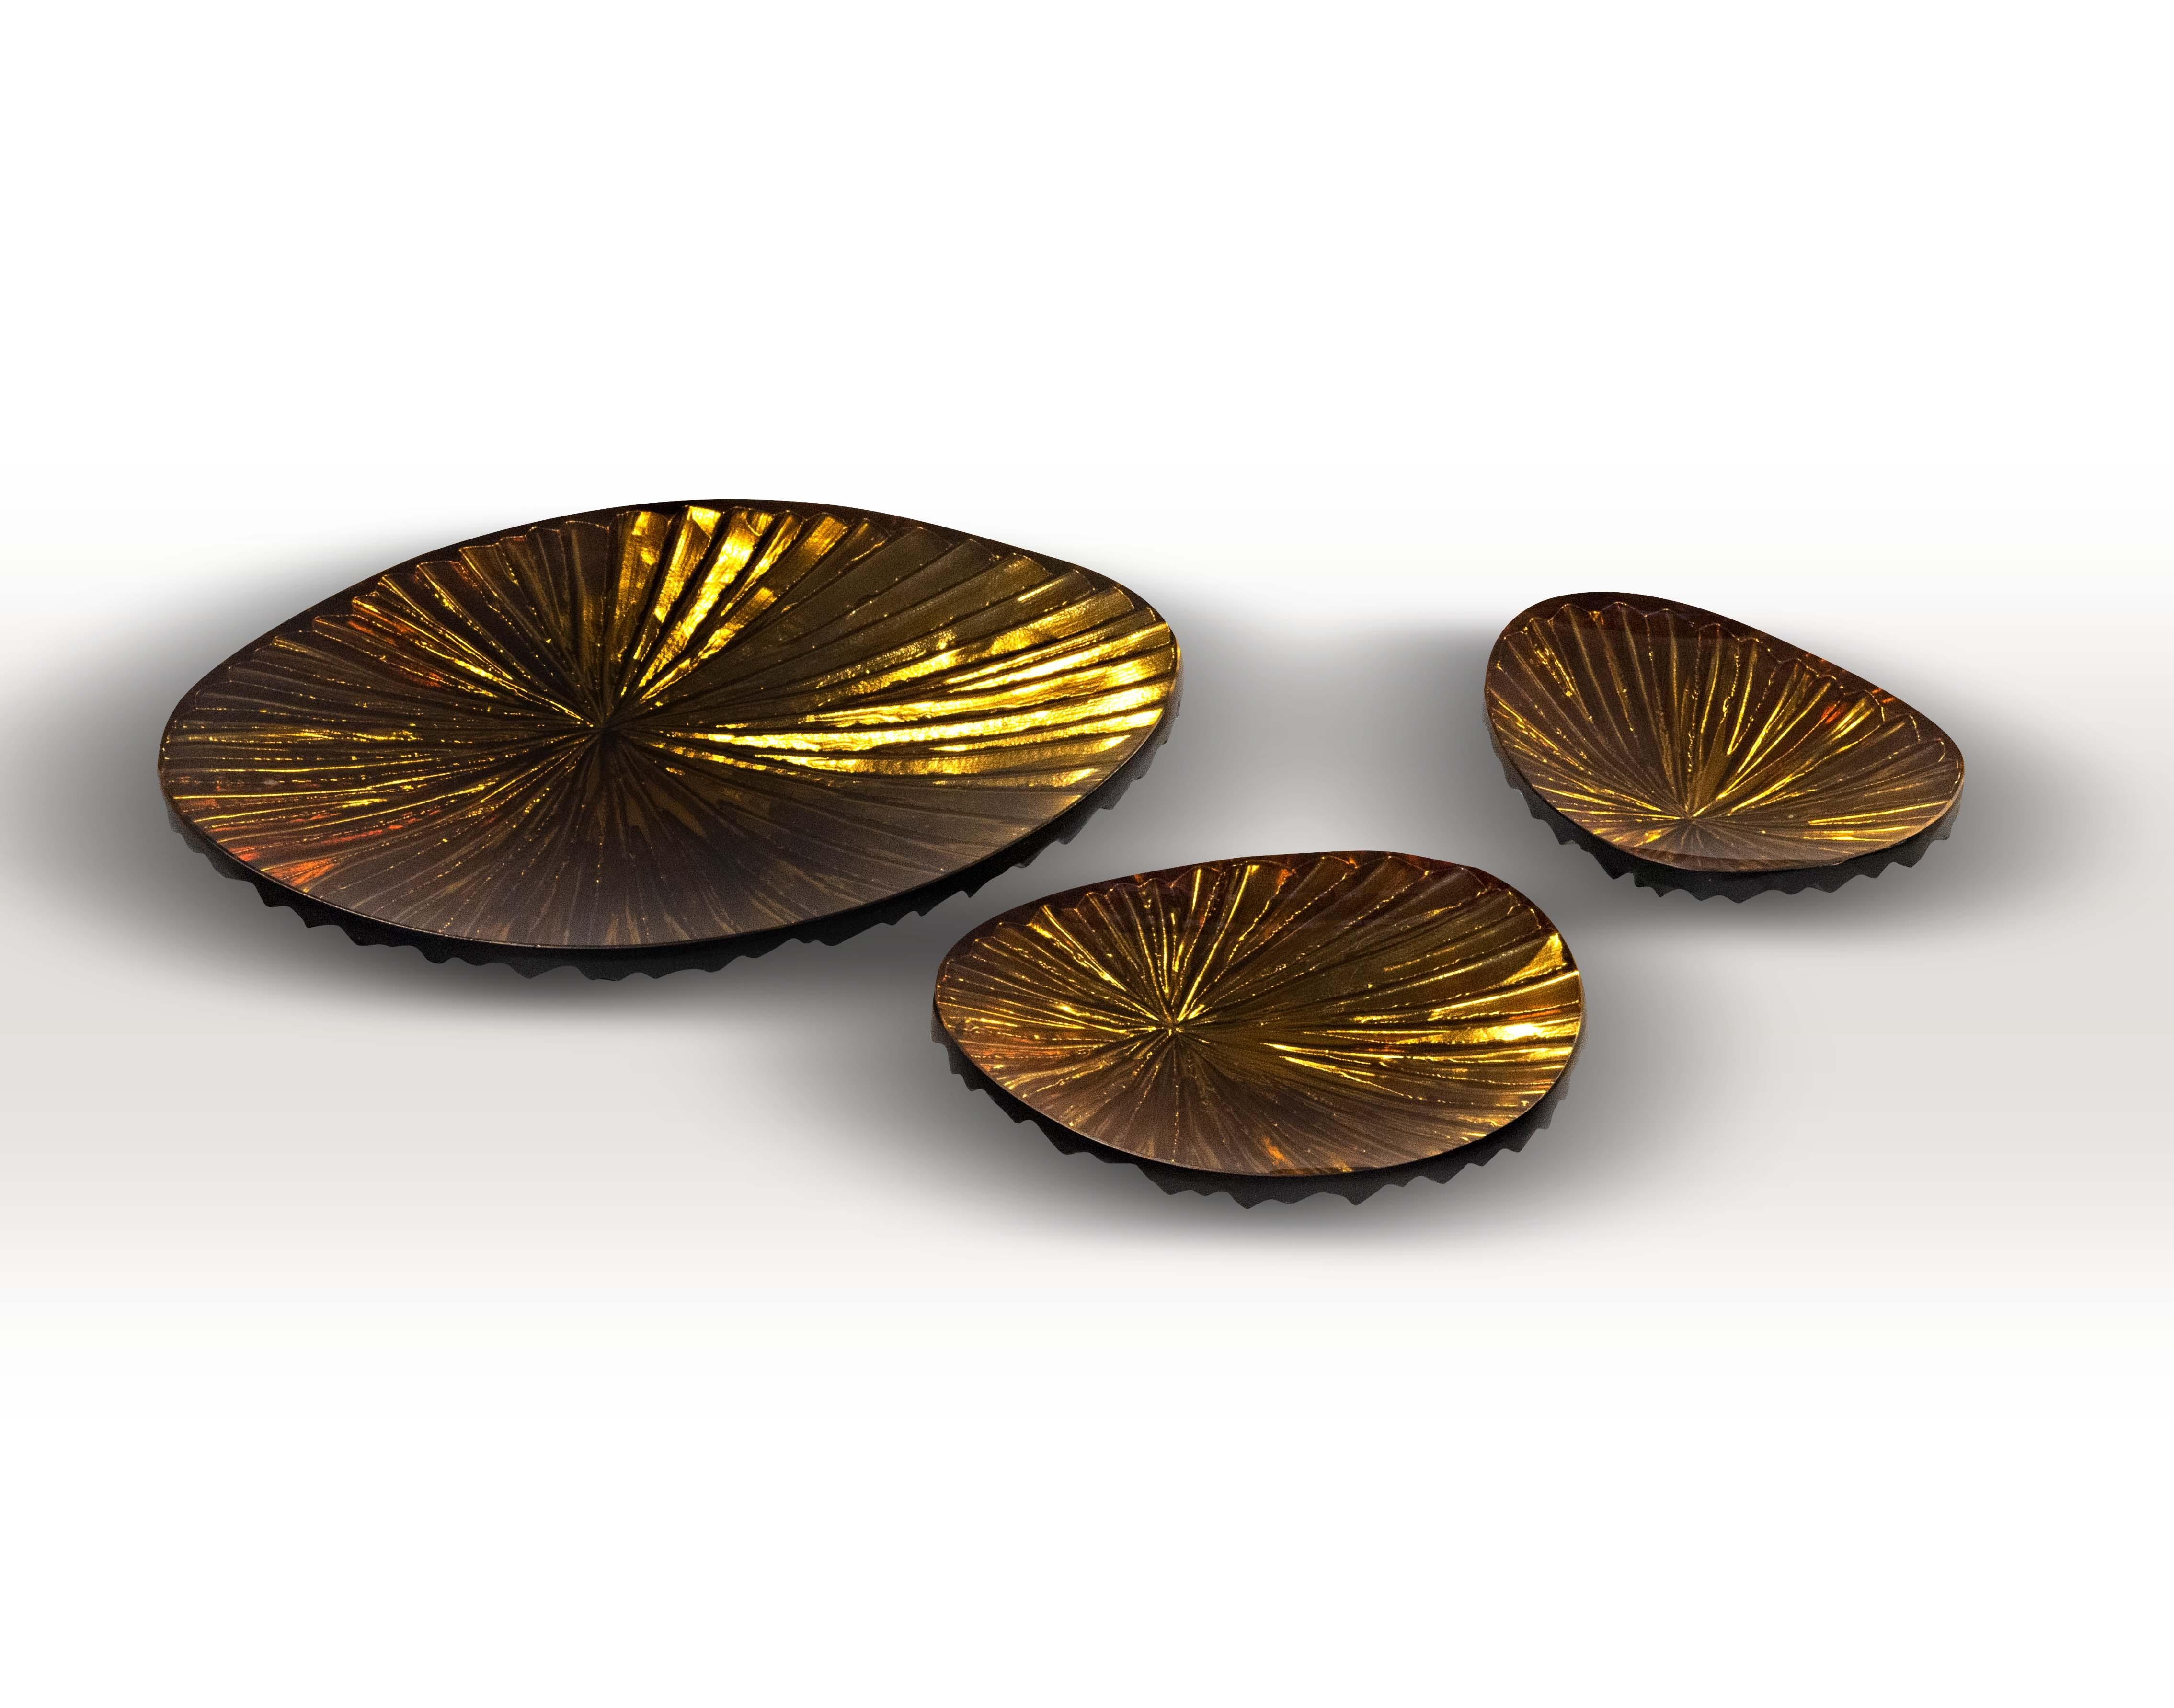 Italian Contemporary 'Oasi' Bowl Amber and Gold Crystal Medium Size by Ghirò Studio For Sale